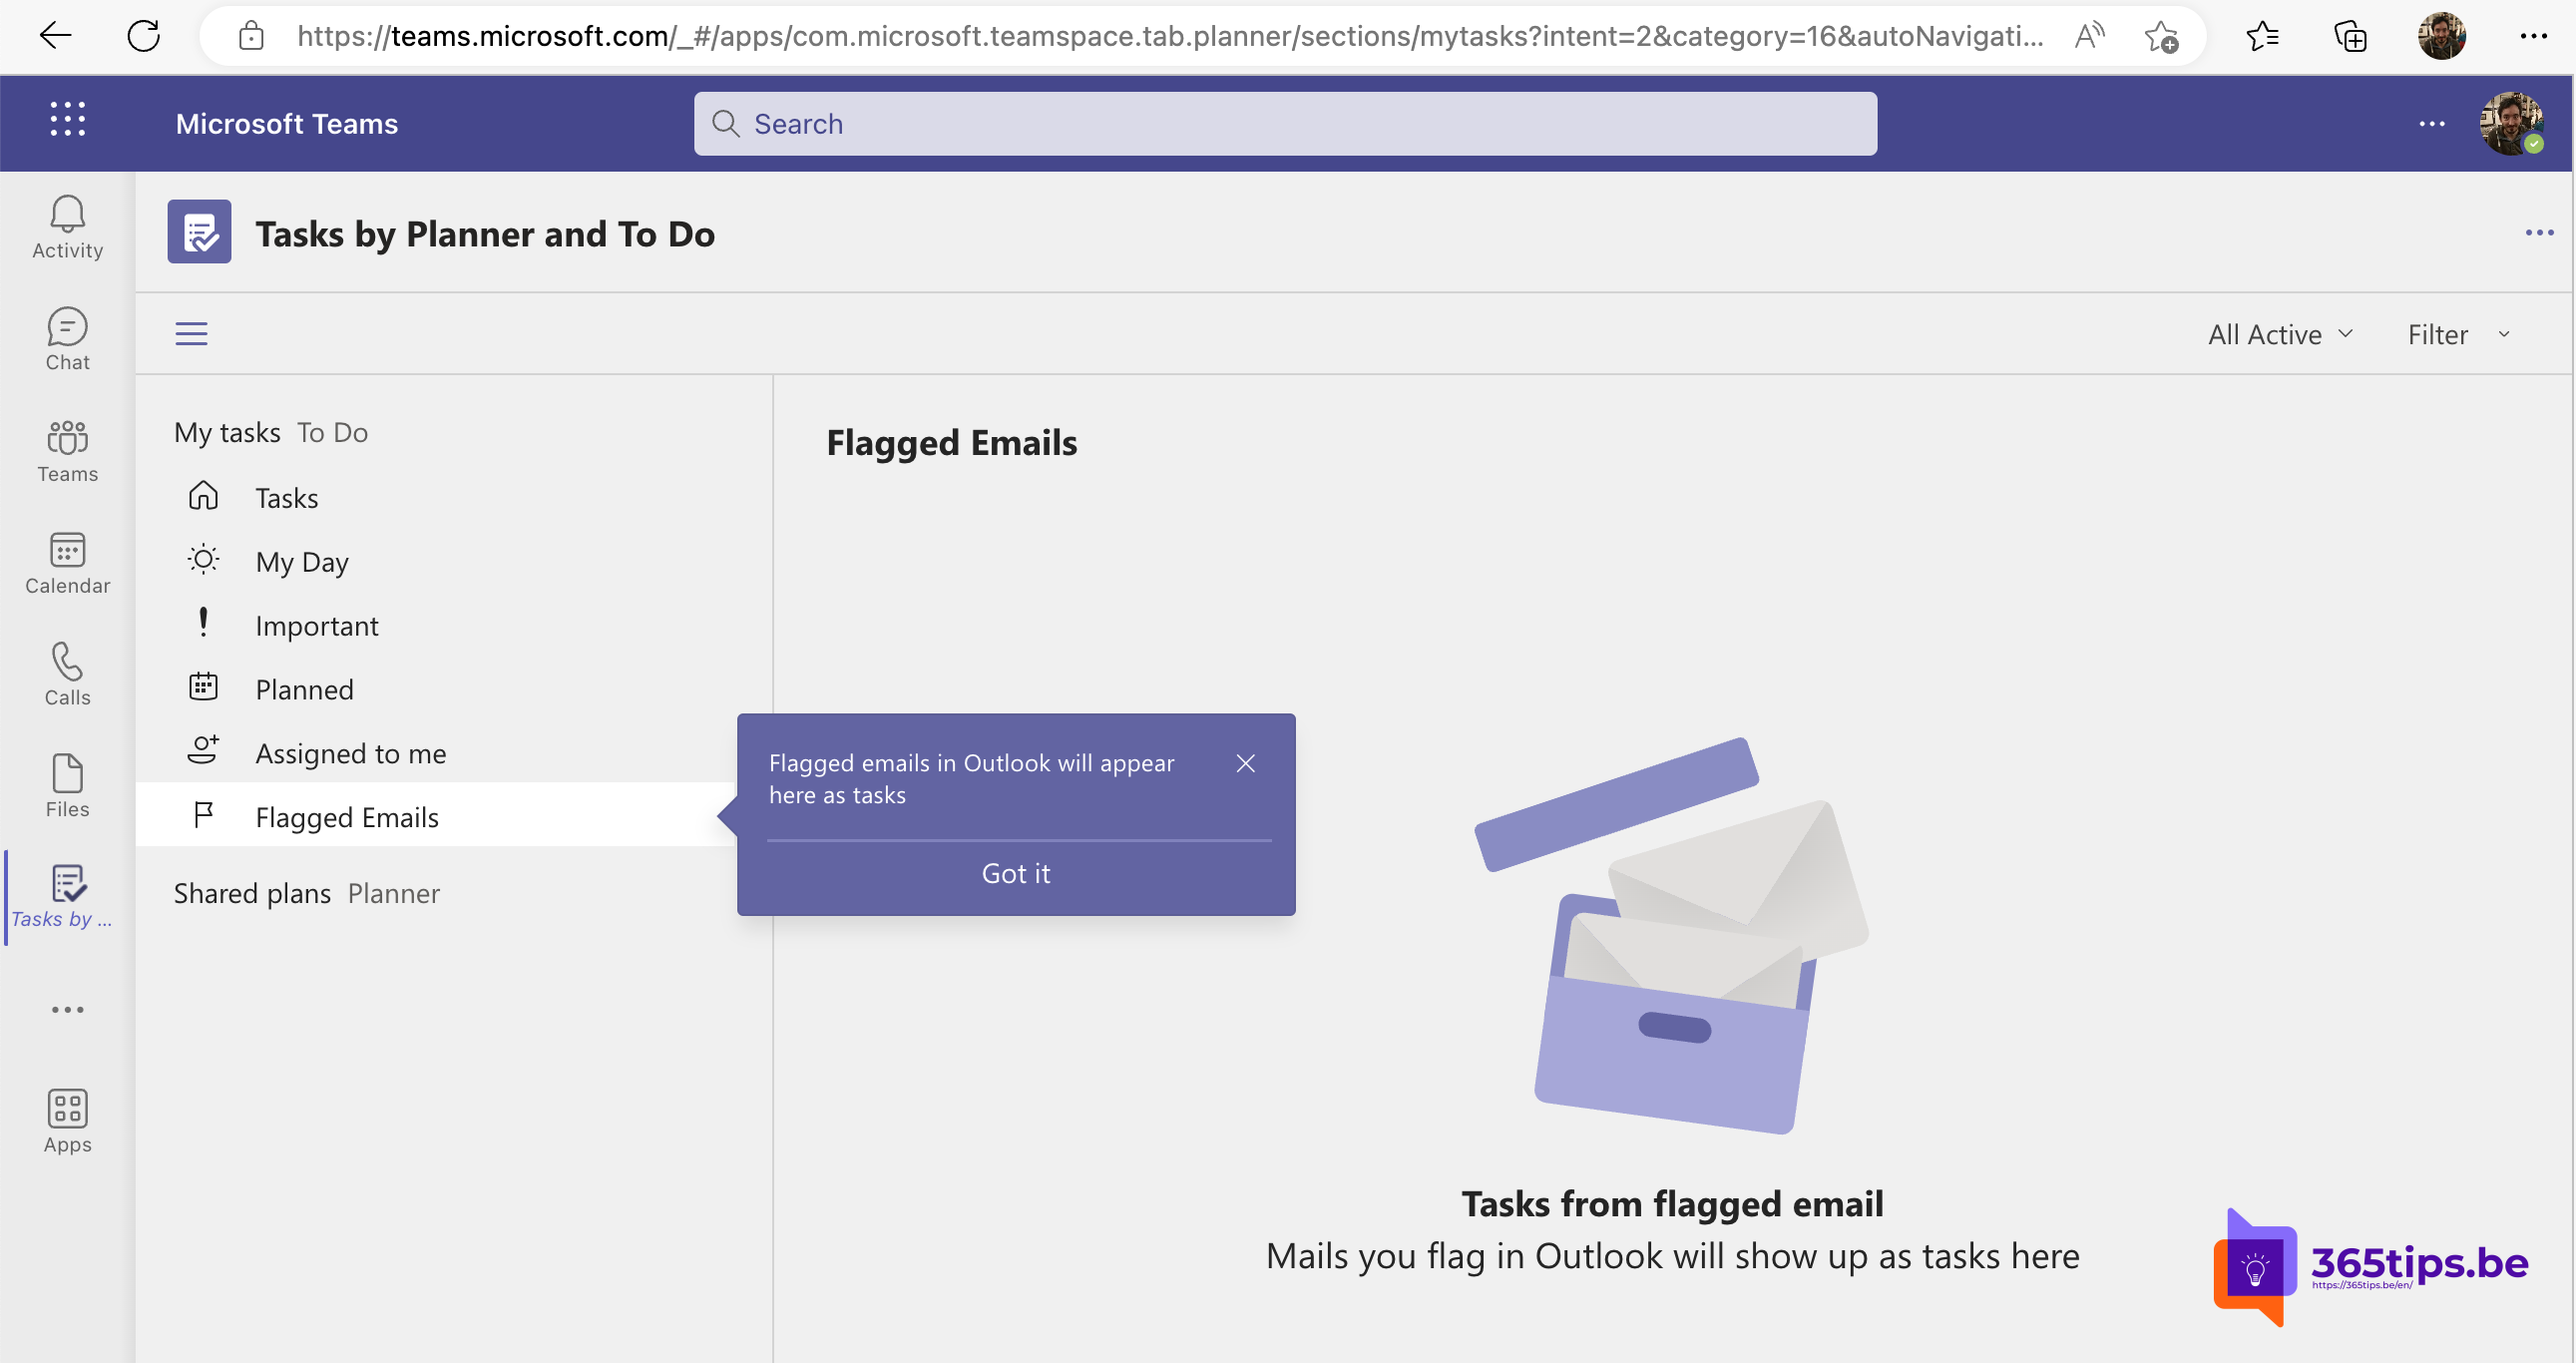 Marked emails is now available in the Tasks by Planner and To Do in Microsoft Teams